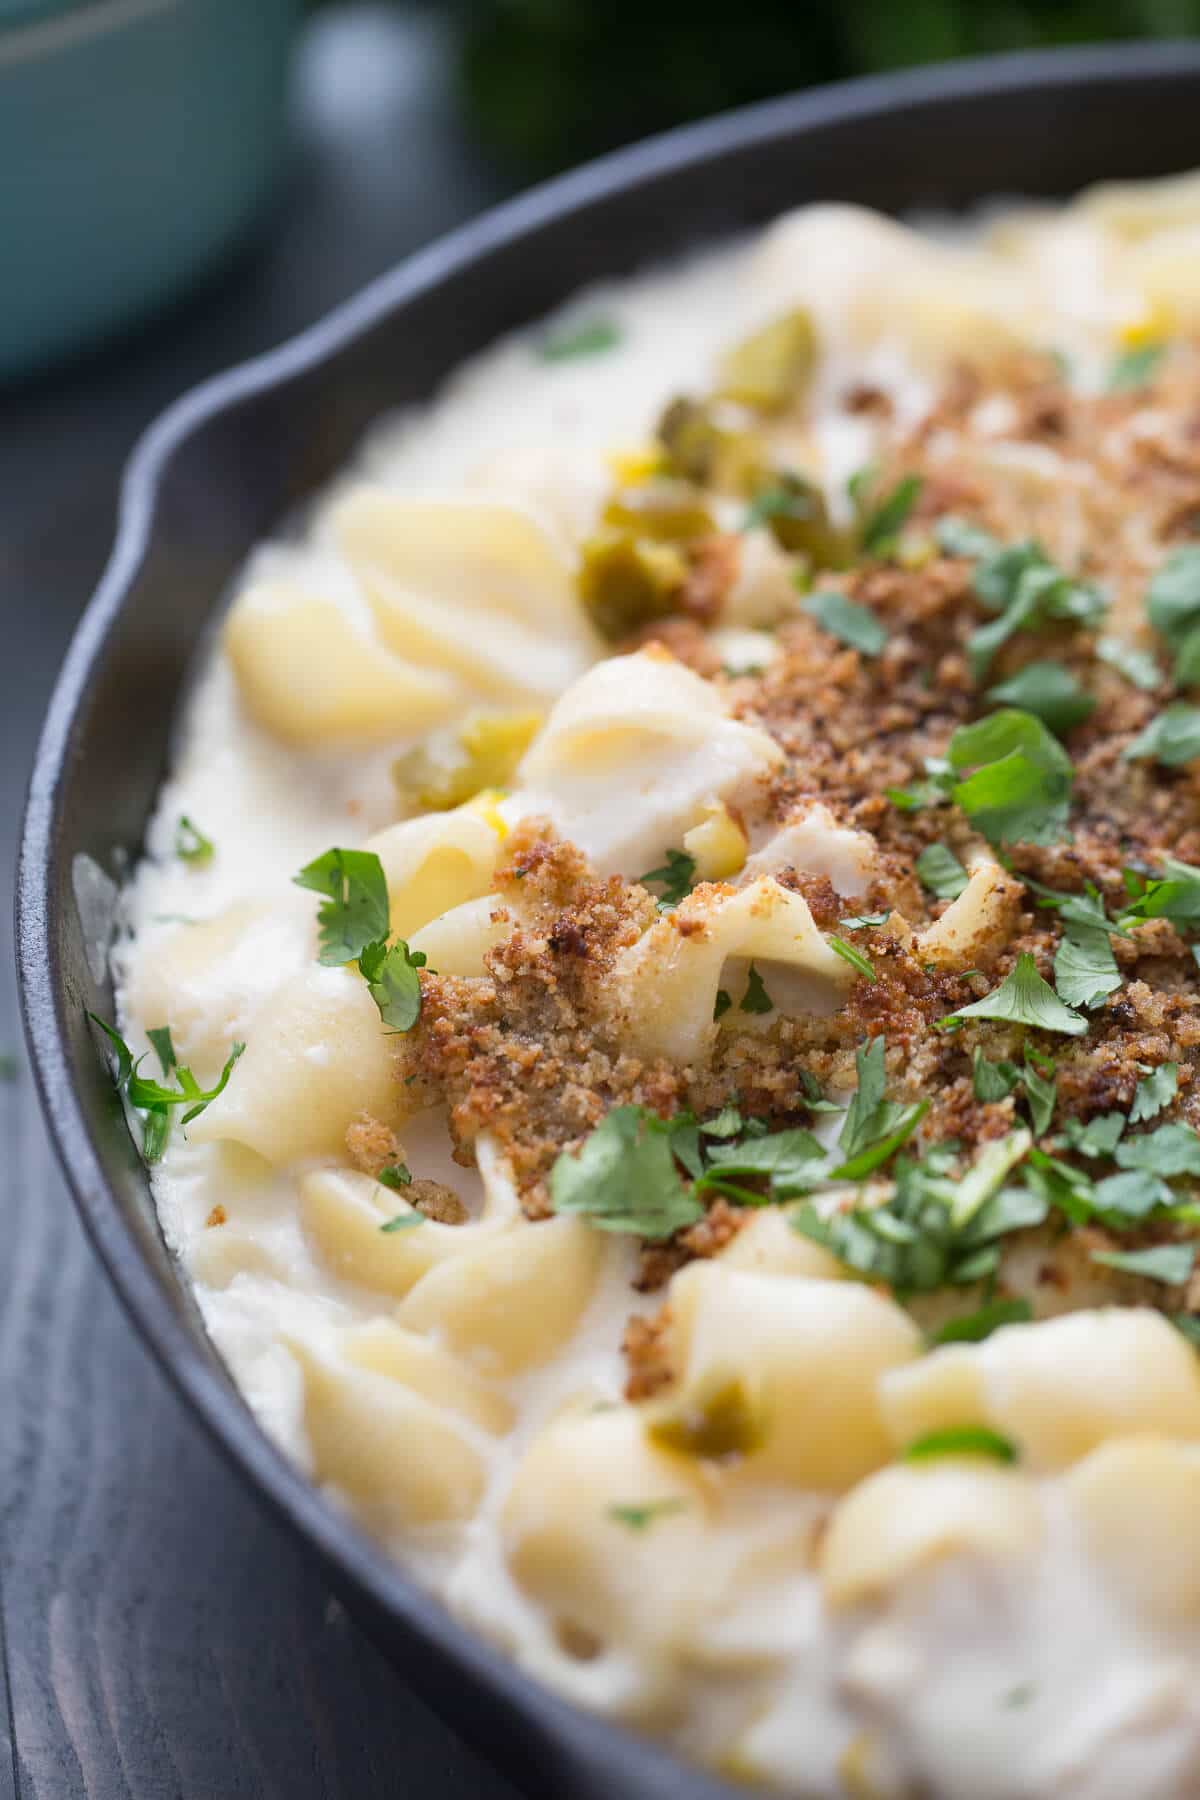 Mexican Mac and Cheese is truly satisfying! It's ultra rich, cheesy and so filling!